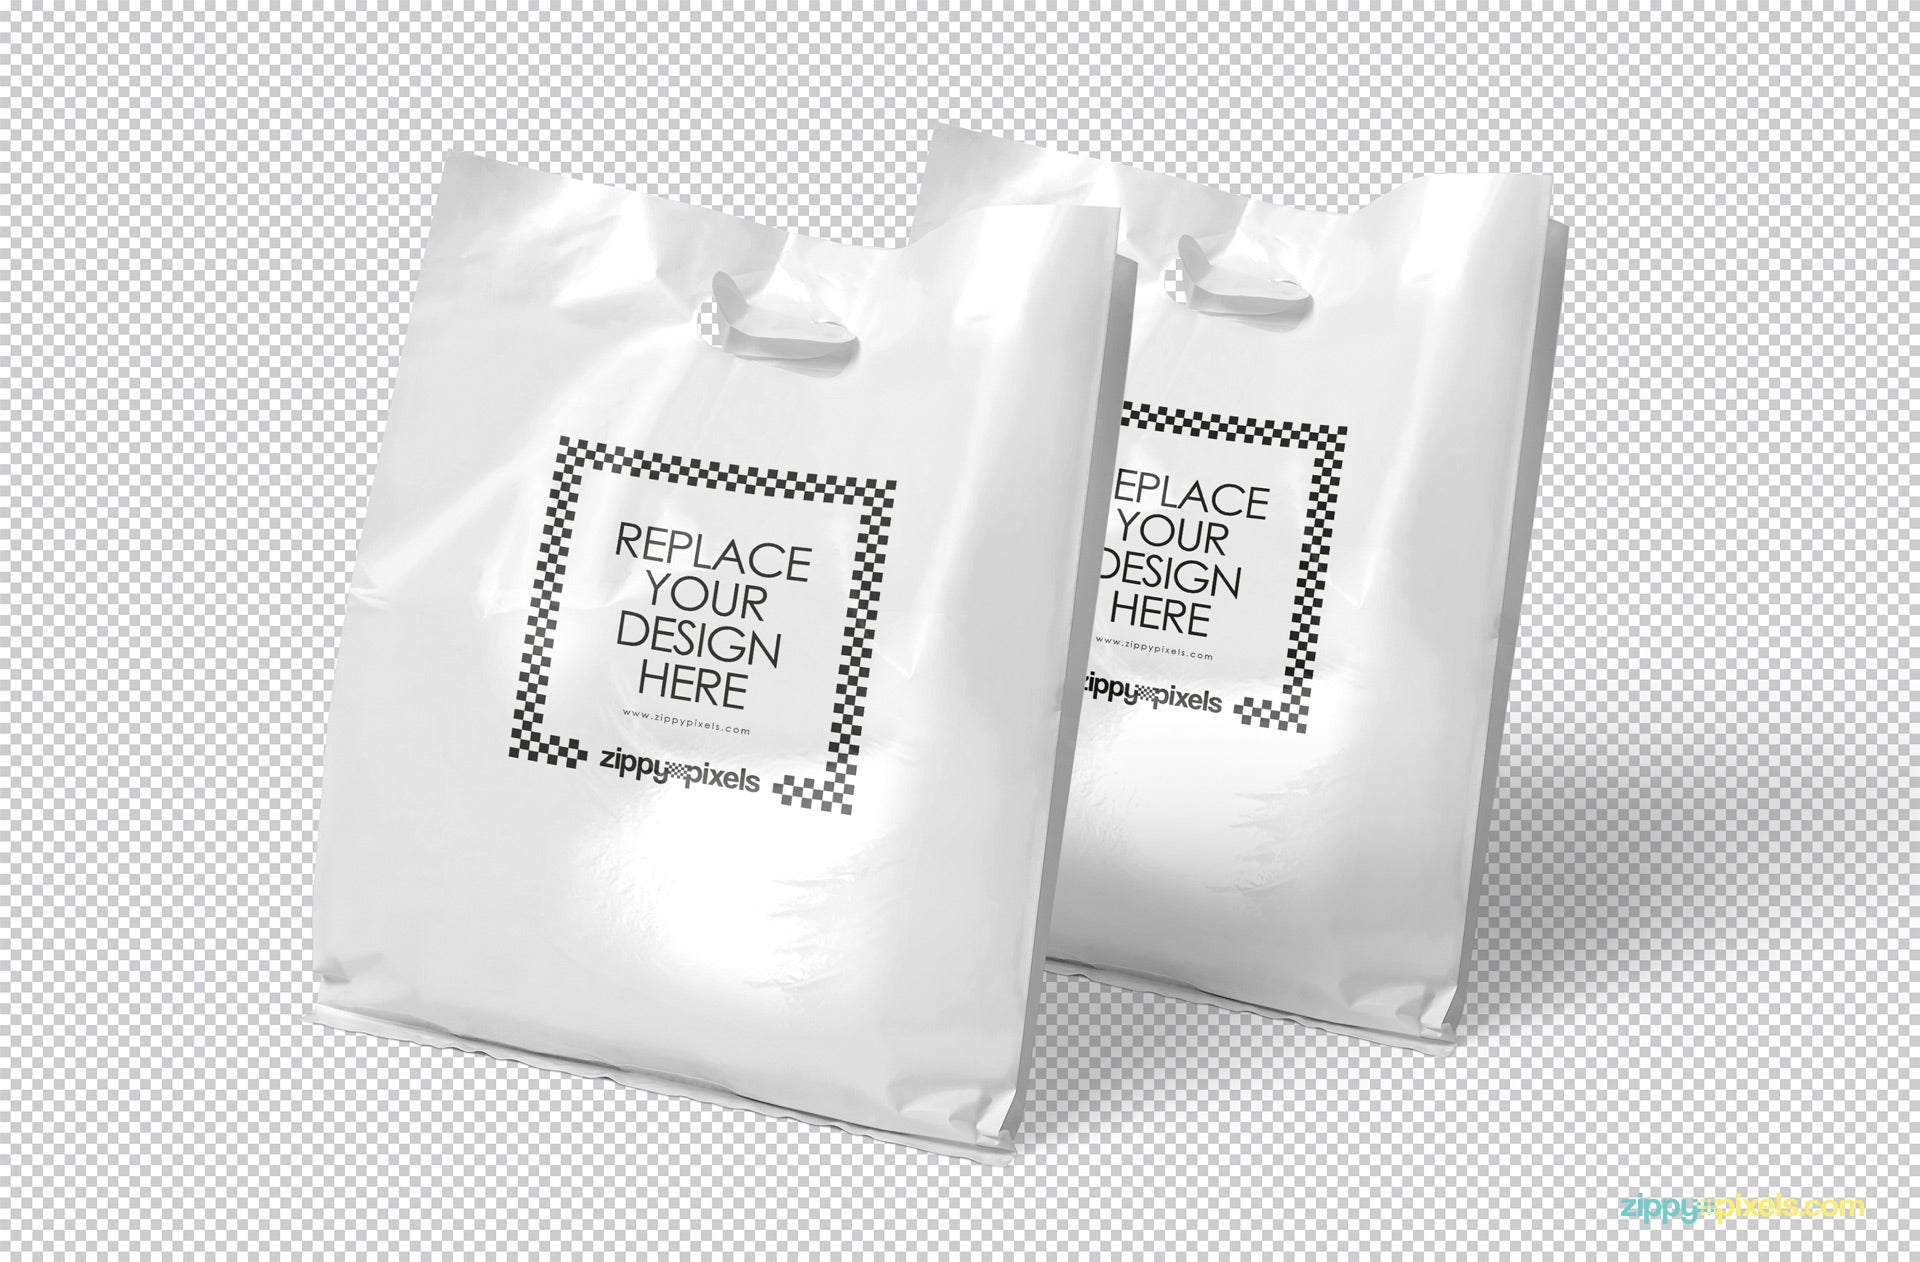 Glossy Food Bag Mockup Set in PSD Format for Photoshop